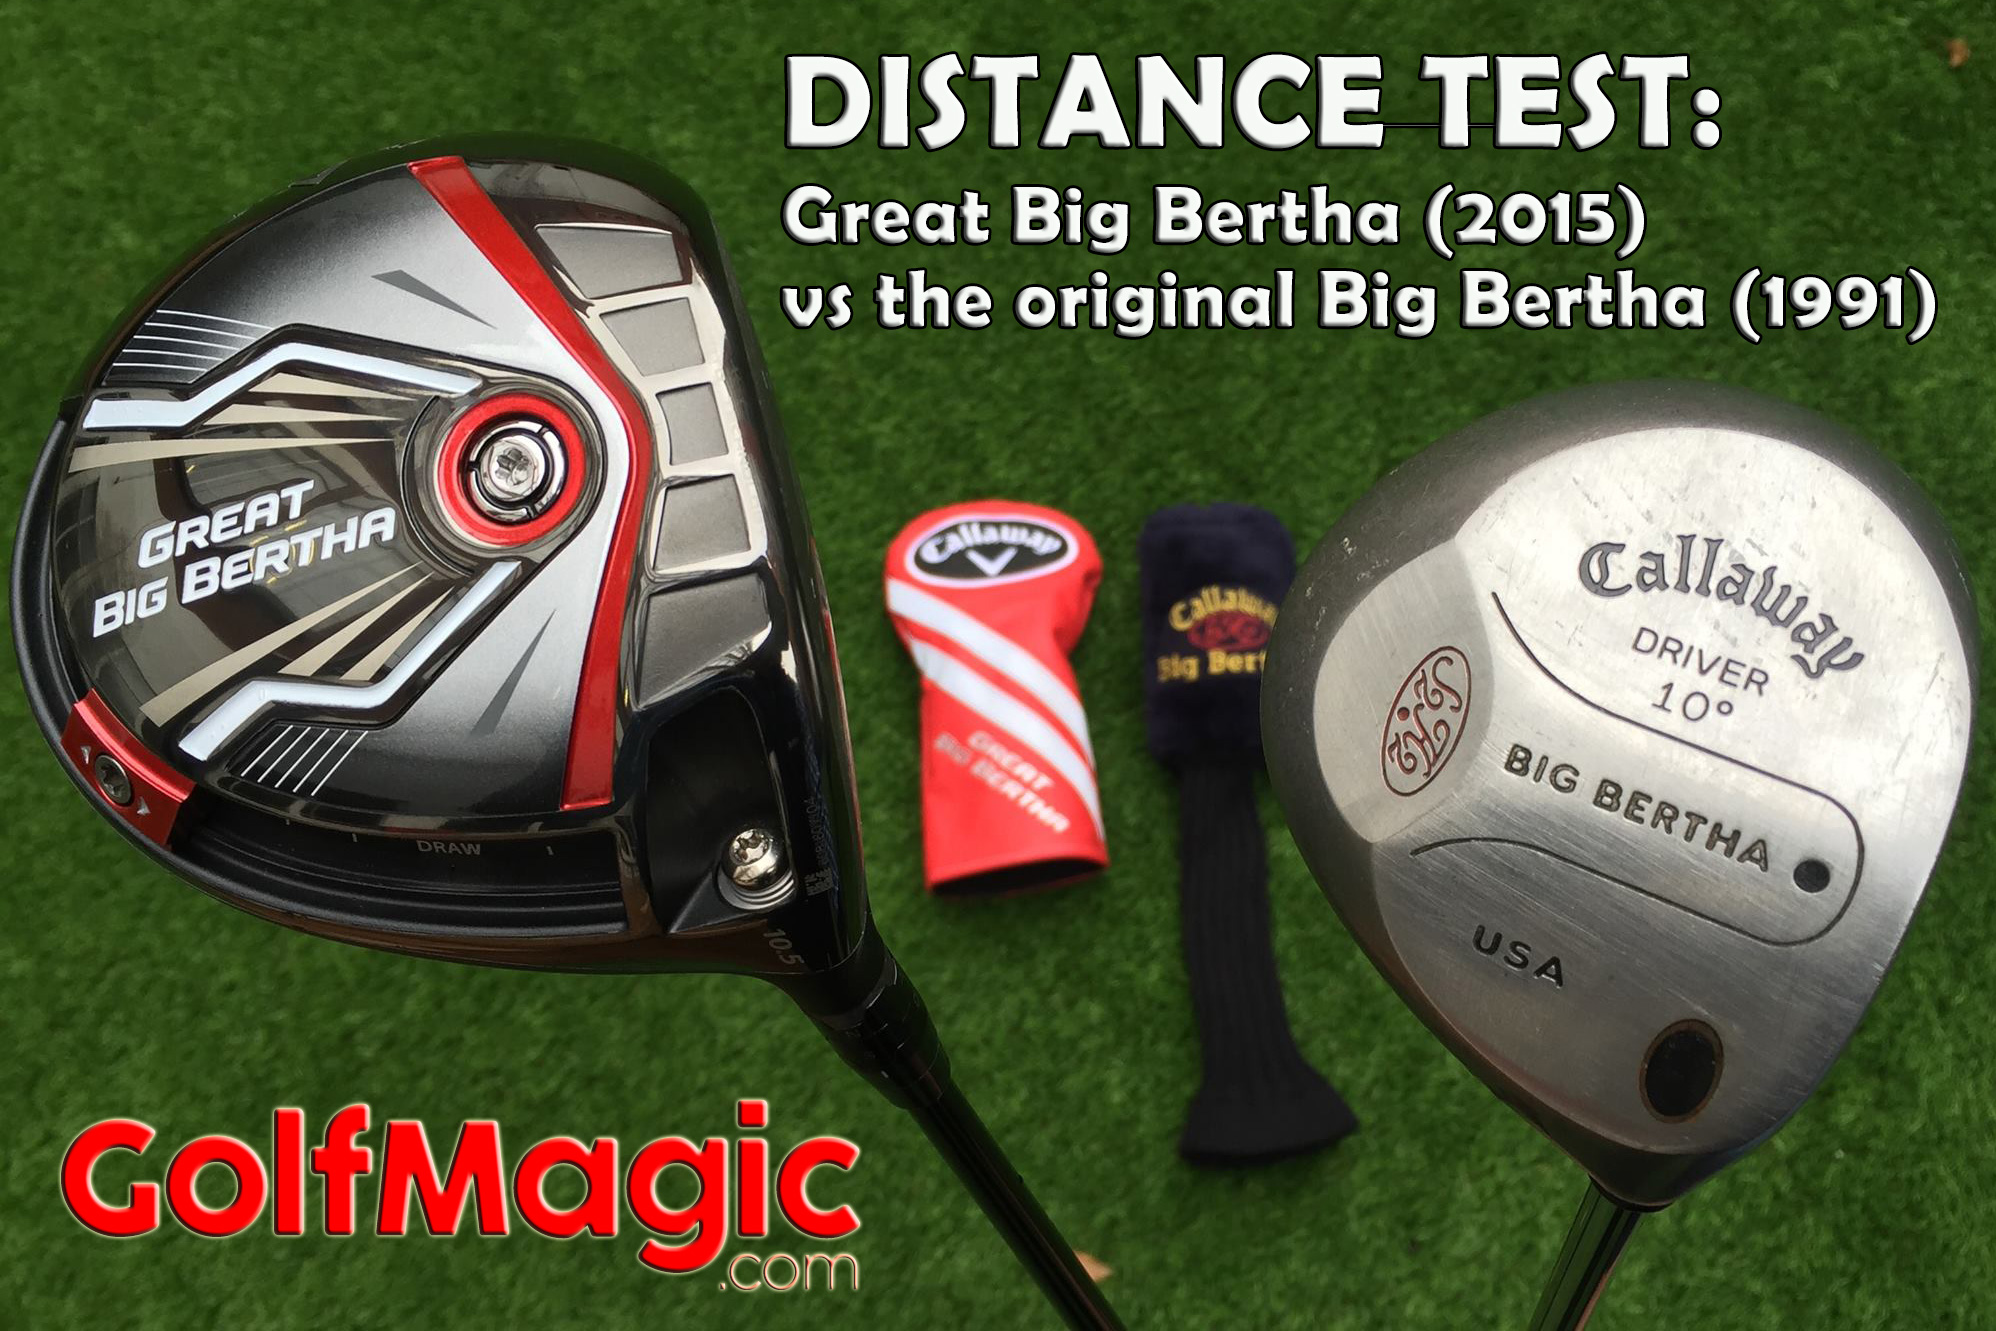 Separated by 24 years of technology, how much longer is Callaway's latest Great Big Bertha driver?